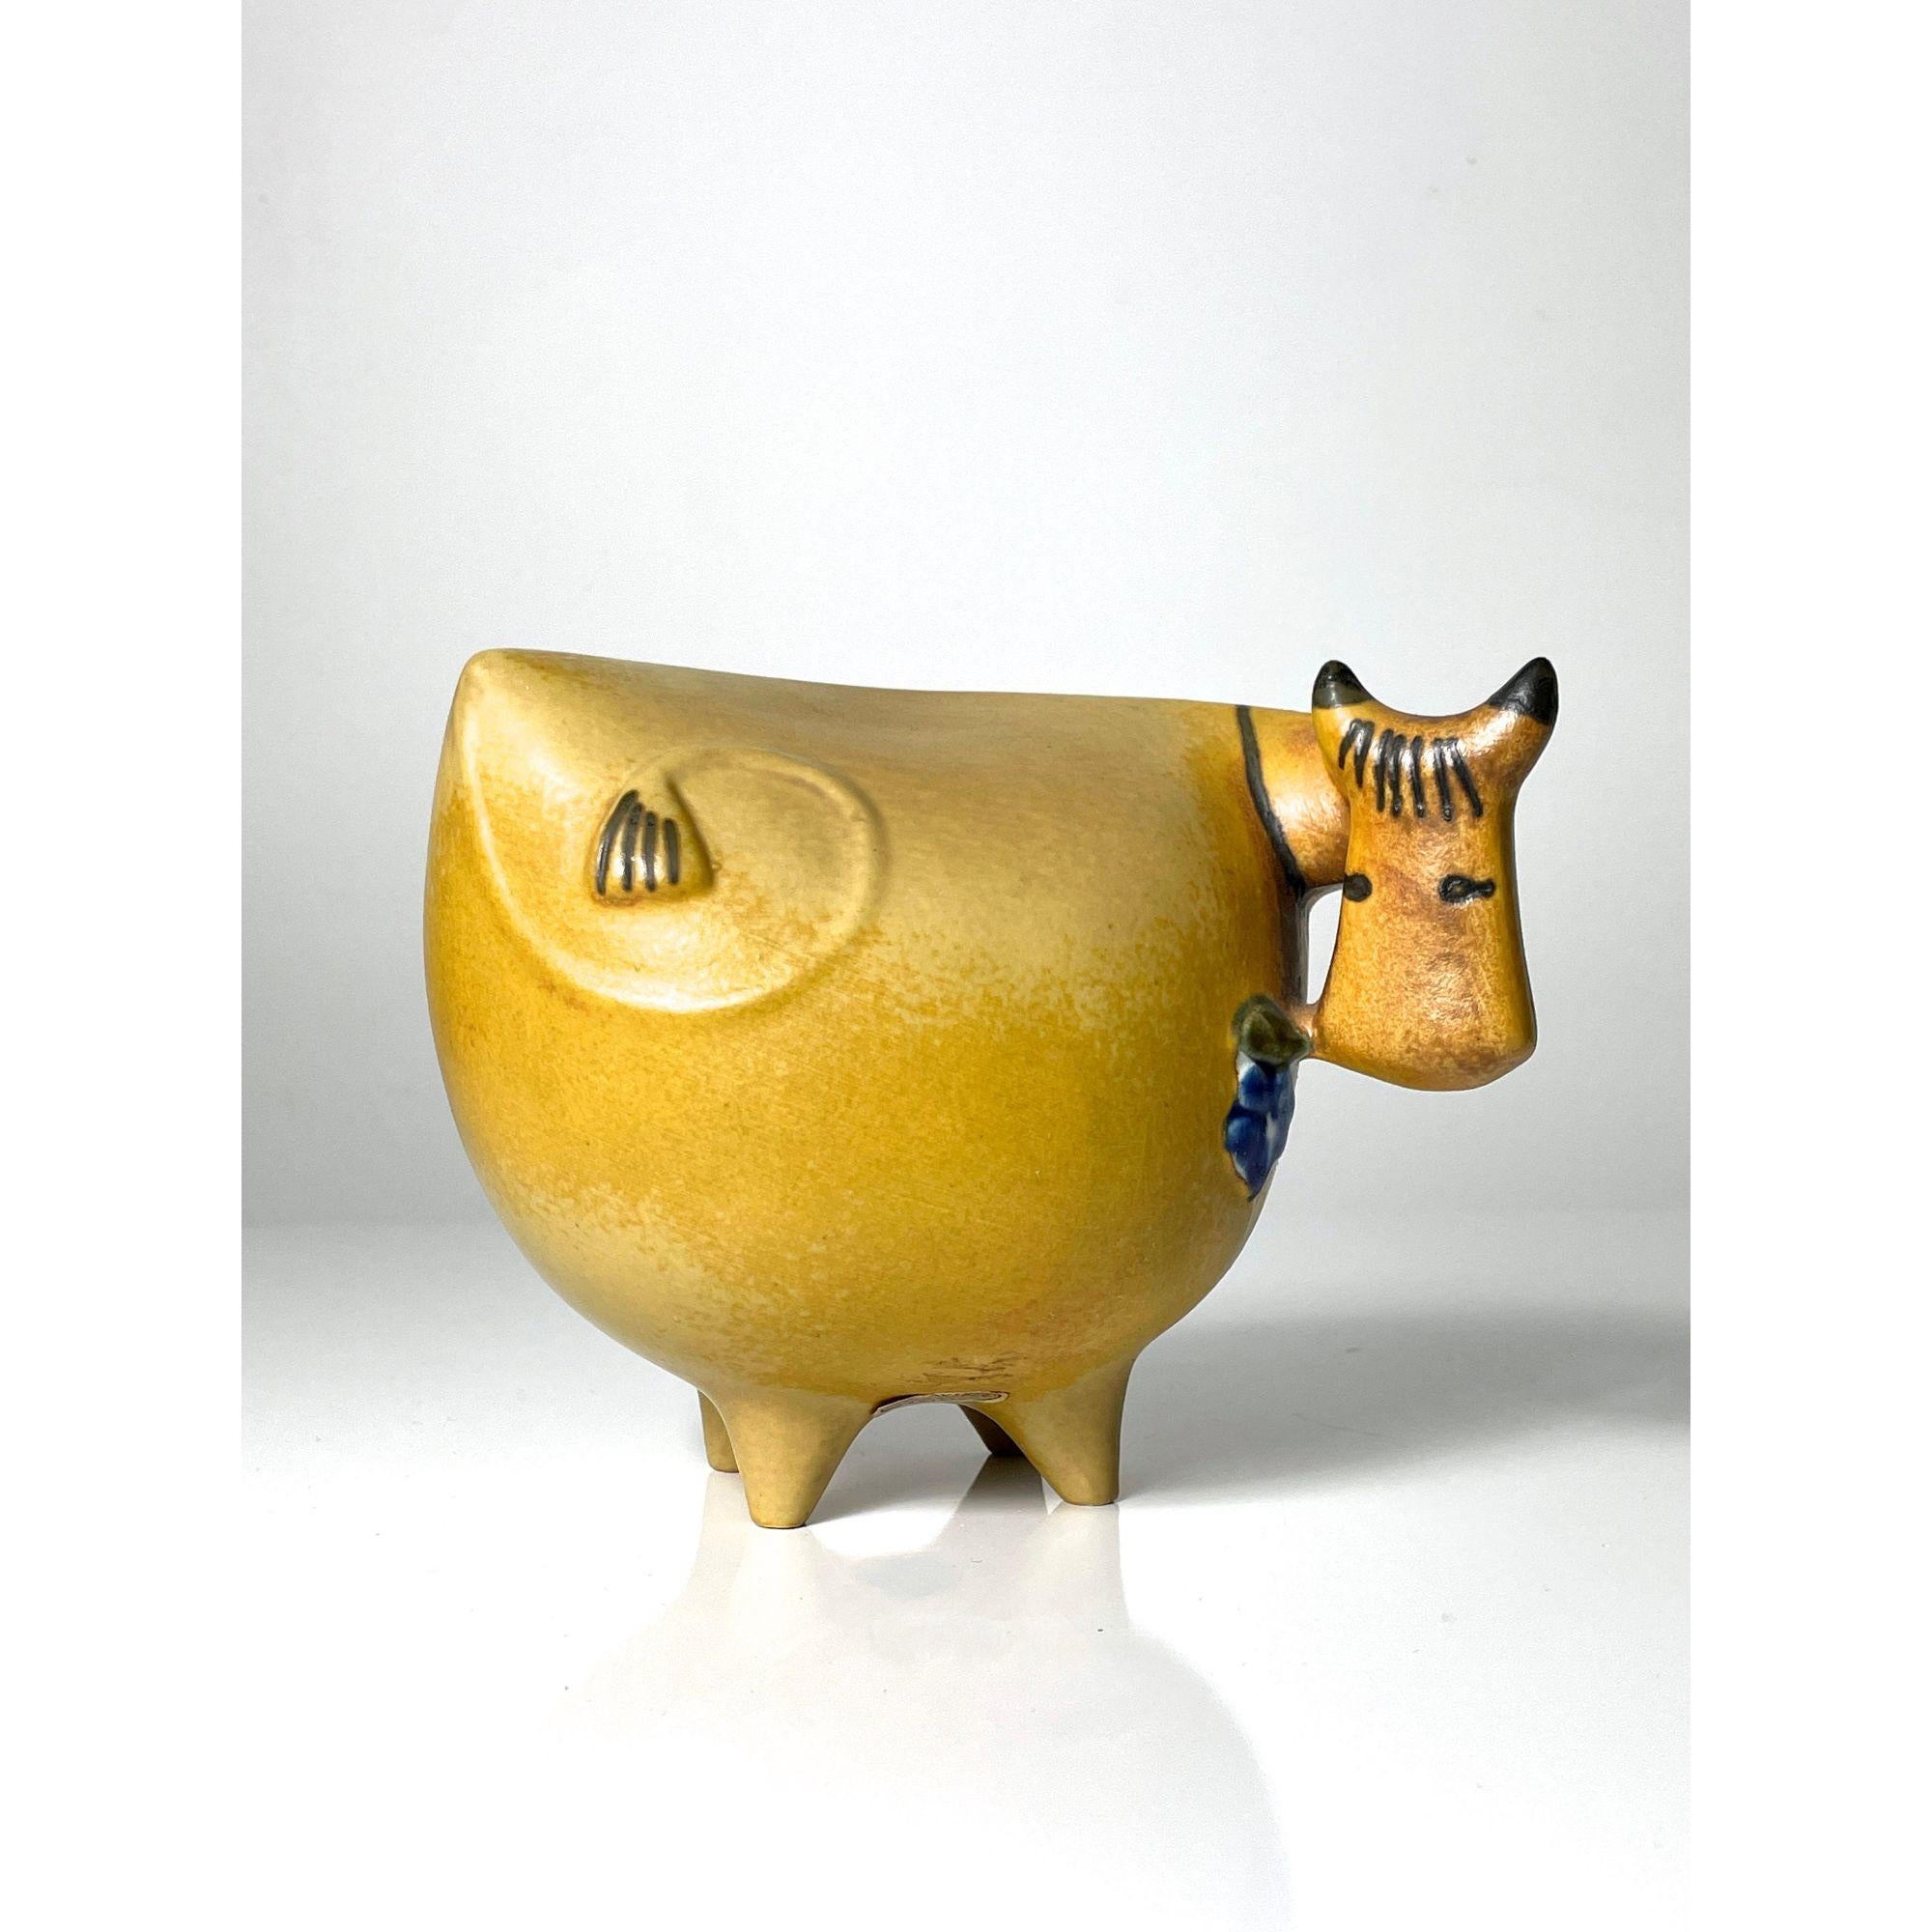 Lisa Larson Gustavsberg Cow Sculpture Figurine 

Ceramic cow sculpture from the Large Zoo series
Designed by Lisa Larson for Gustavsberg Sweden c. 1960s
Labeled to underside

Additional Information:
Materials: Ceramic
Dimensions: 4.5